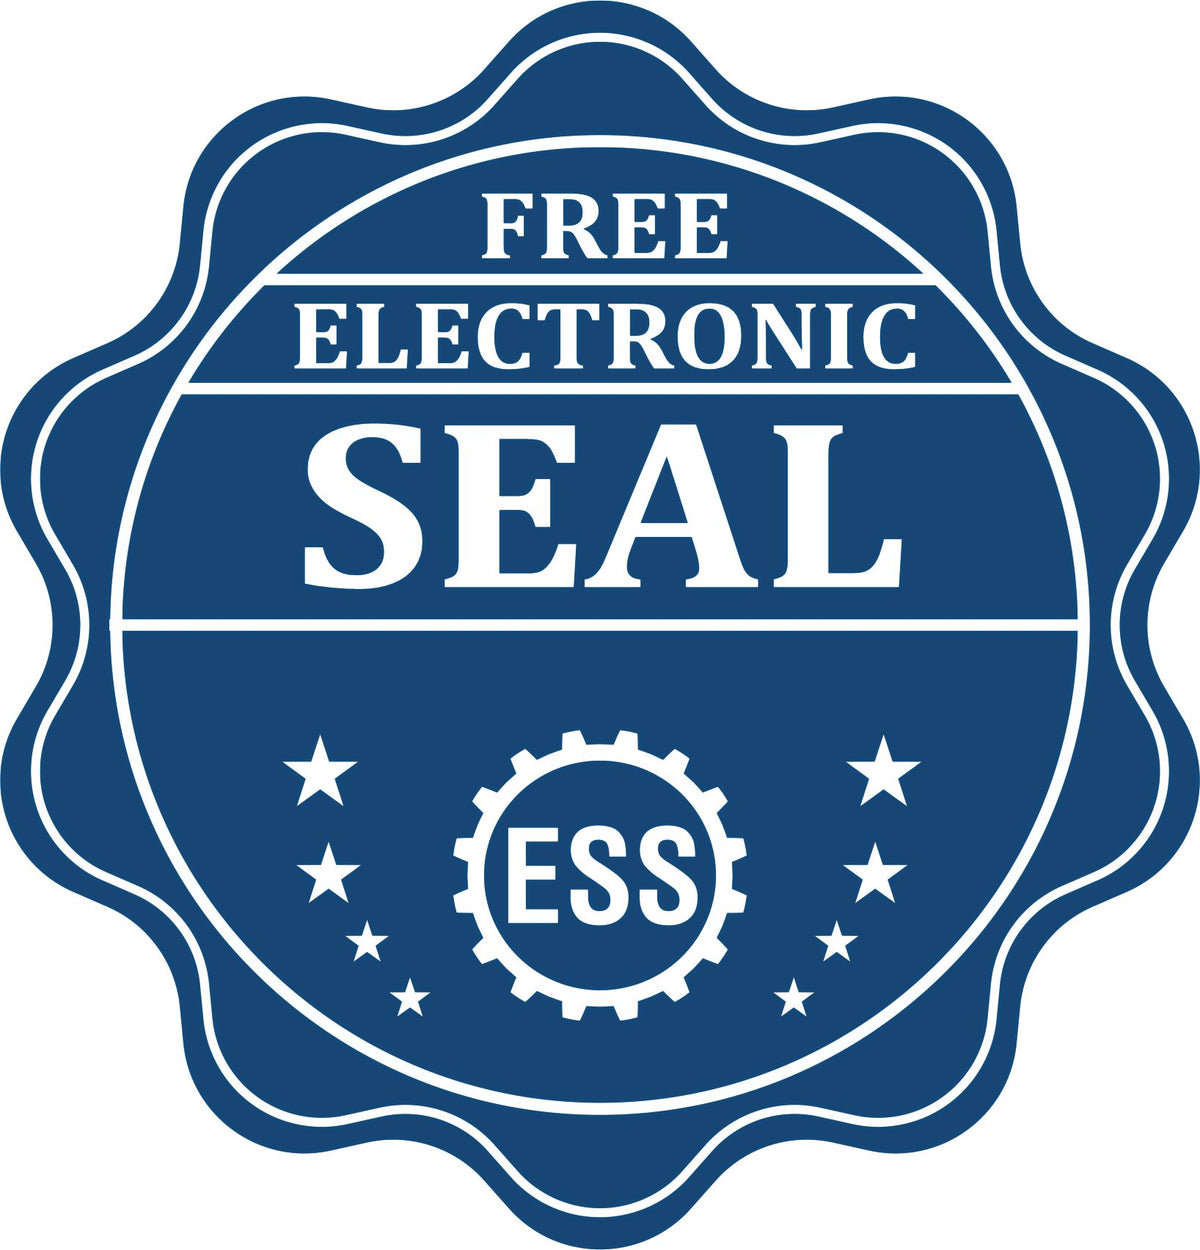 A badge showing a free electronic seal for the State of Maryland Extended Long Reach Geologist Seal with stars and the ESS gear on the emblem.